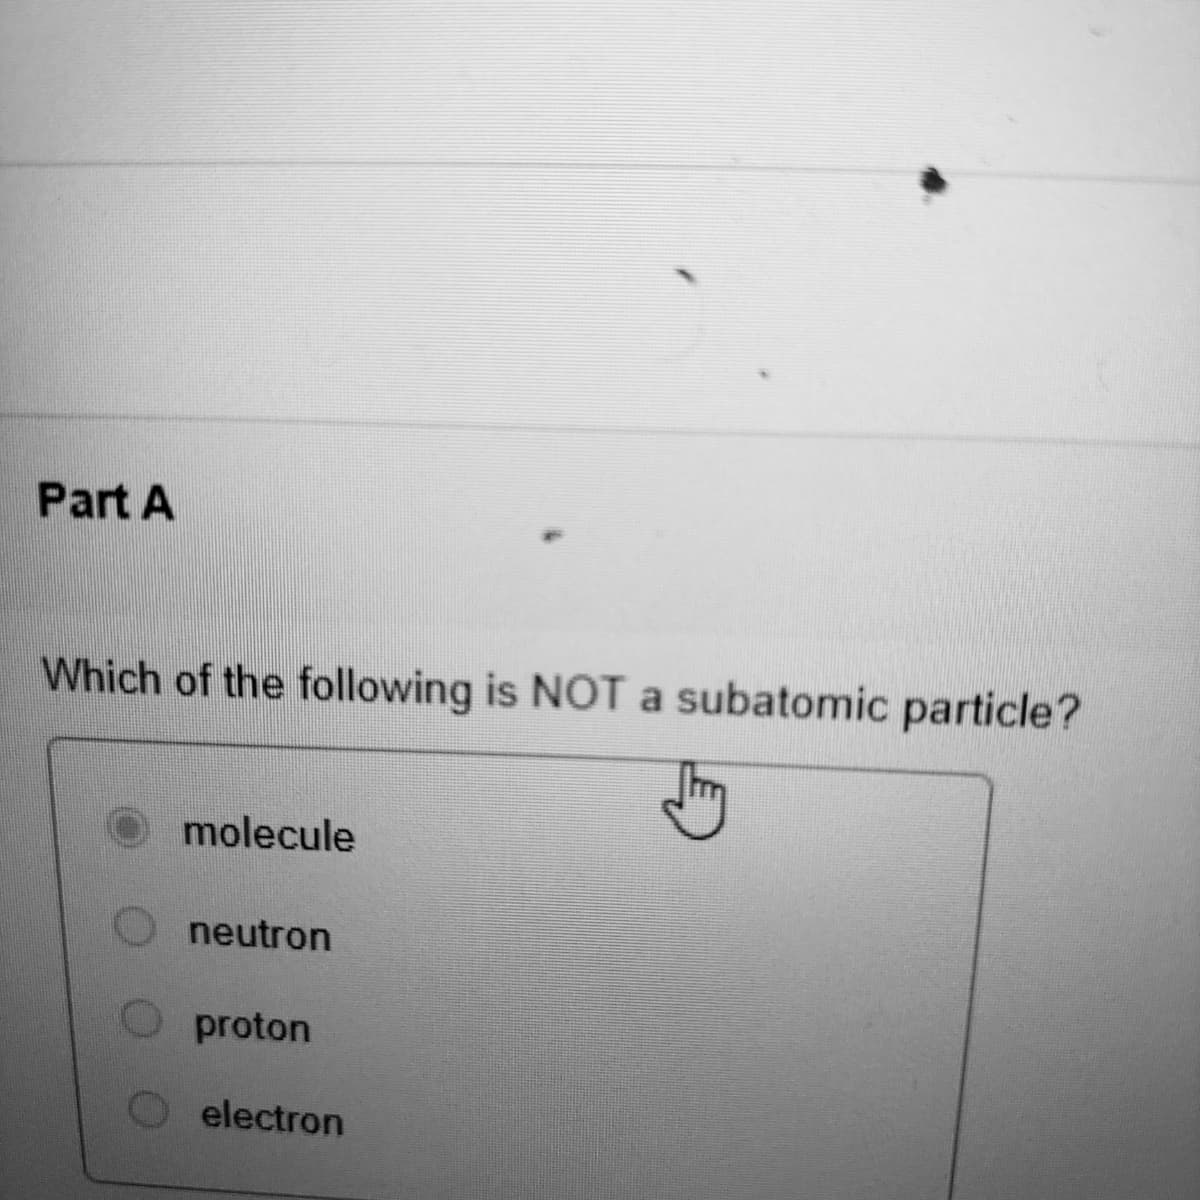 Part A
Which of the following is NOTa subatomic particle?
molecule
O neutron
proton
electron
